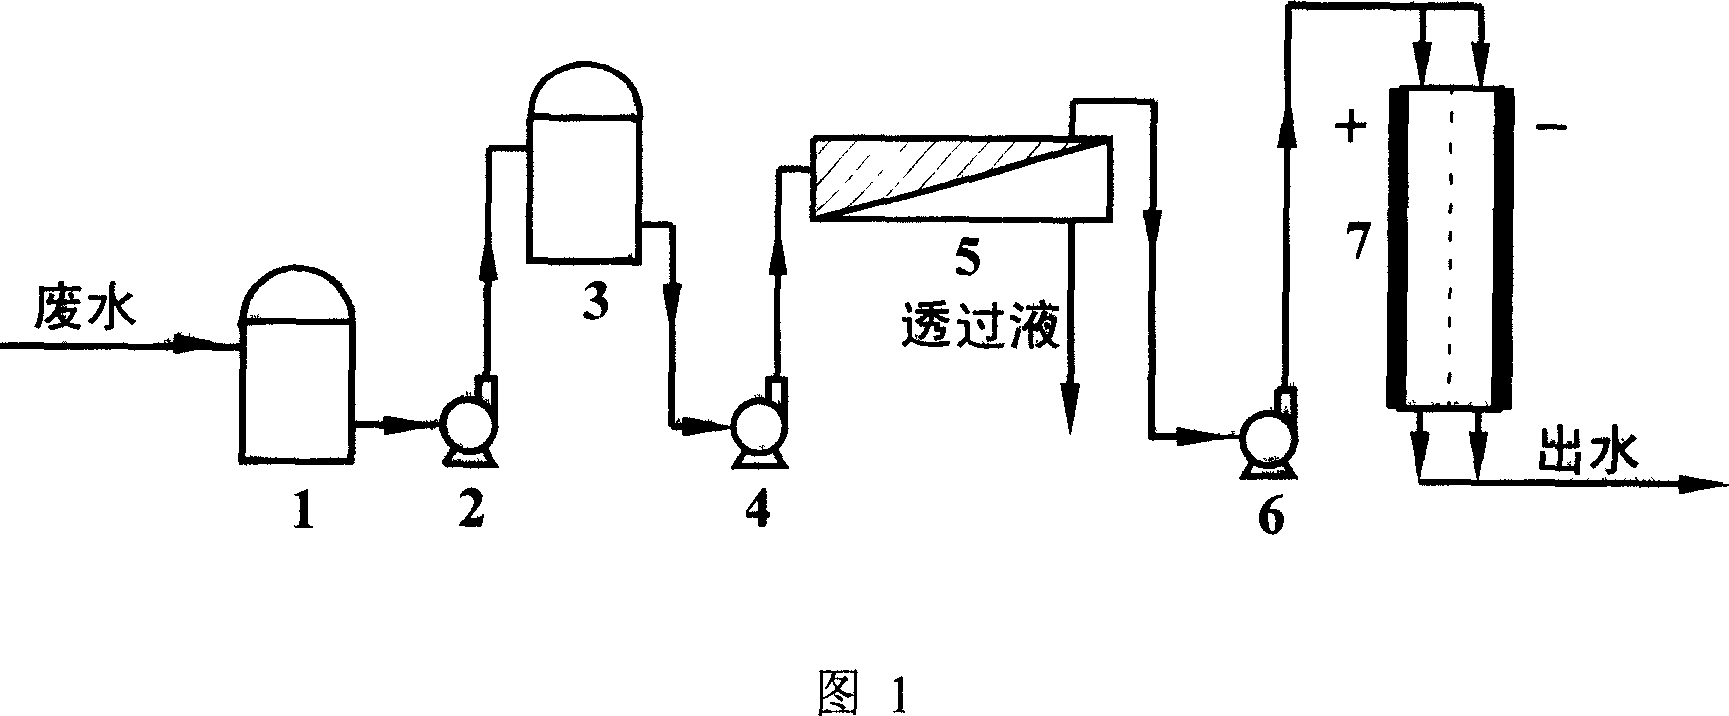 Method of diaphragm separation electrolyzing integrated treatment of wate, water containing heavy metal copper